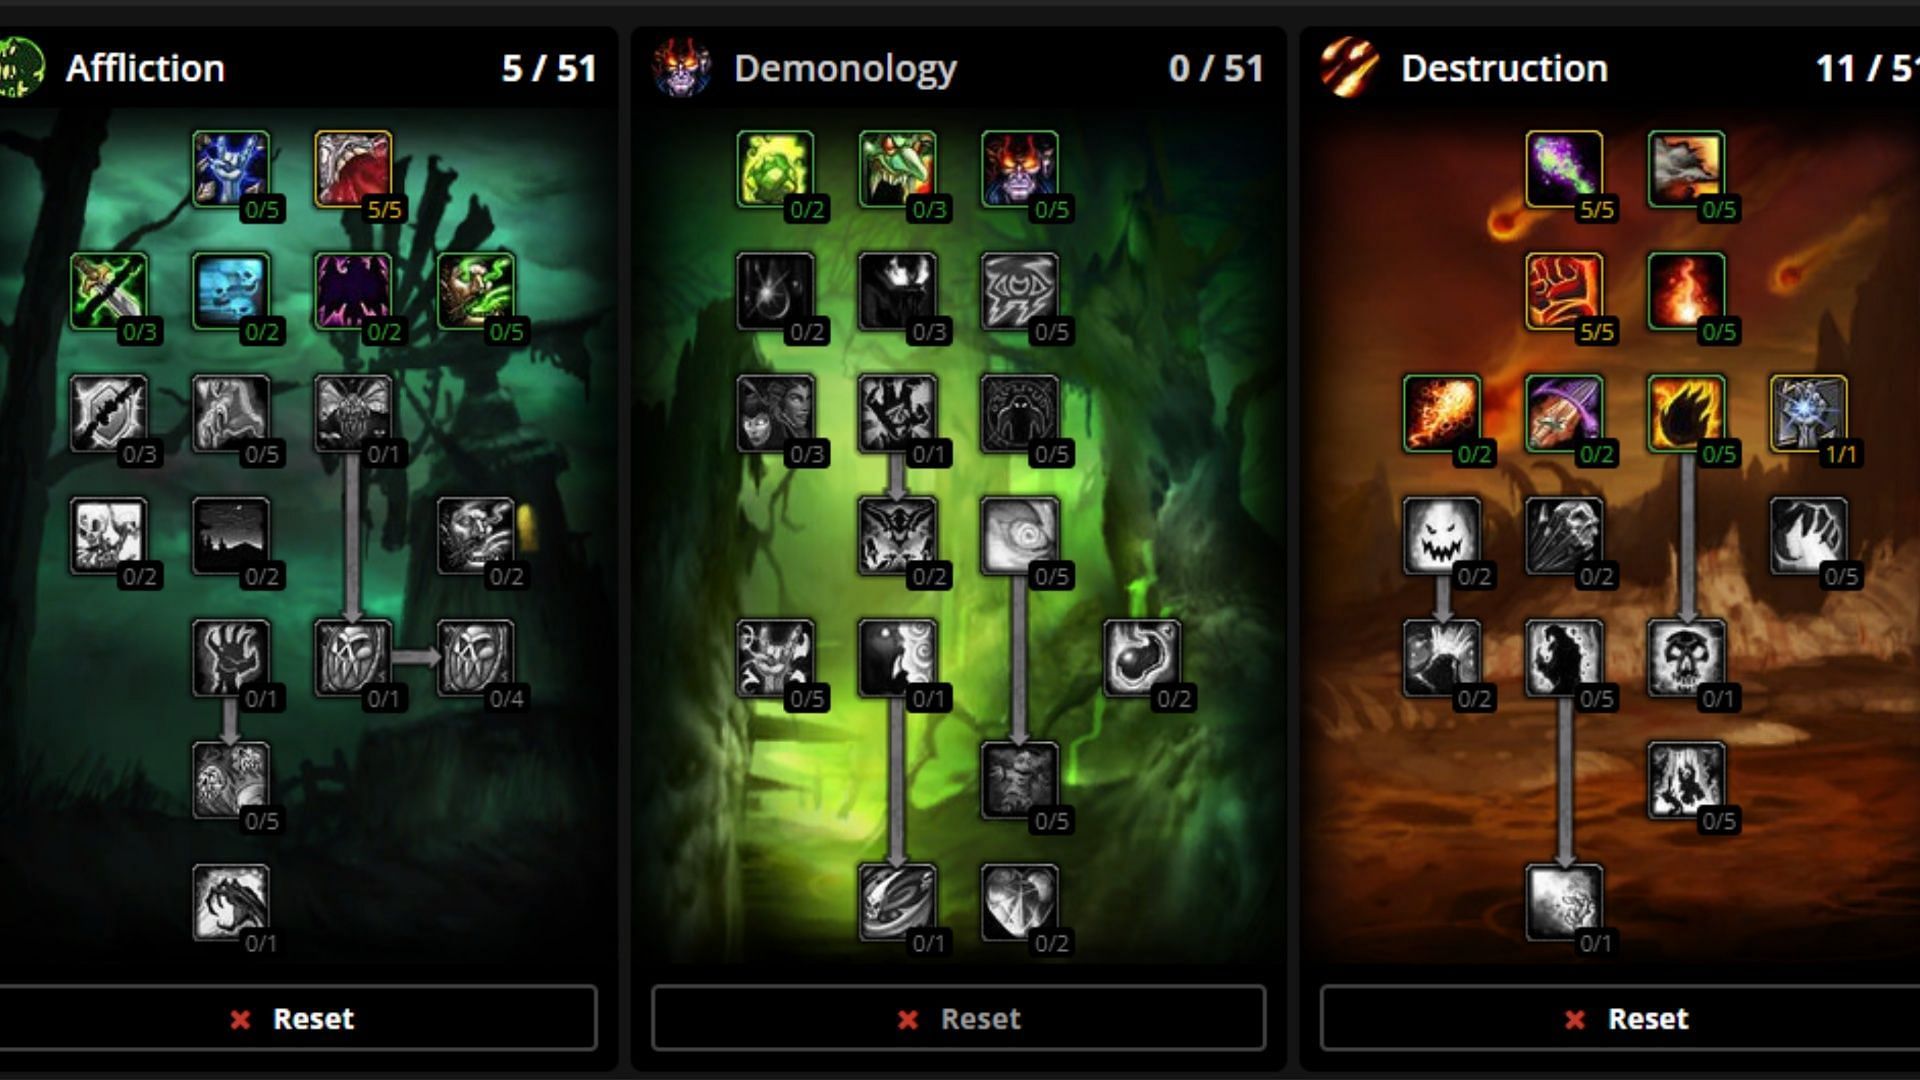 Talent points for both Demonology DPS and Affliction (Image via Wowhead.com)